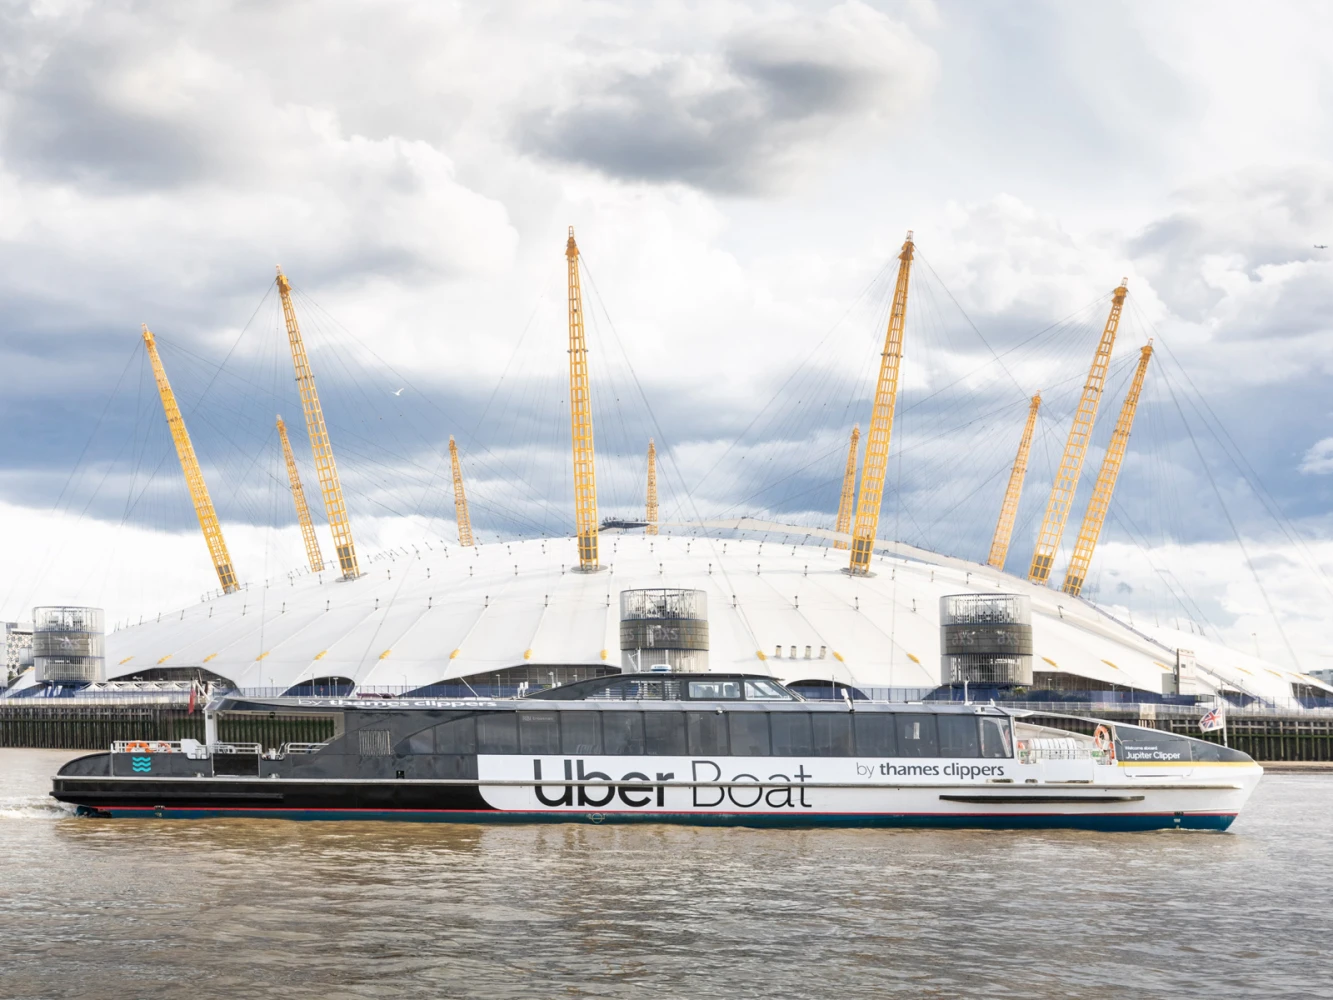 Uber Boat by Thames Clippers: What to expect - 1